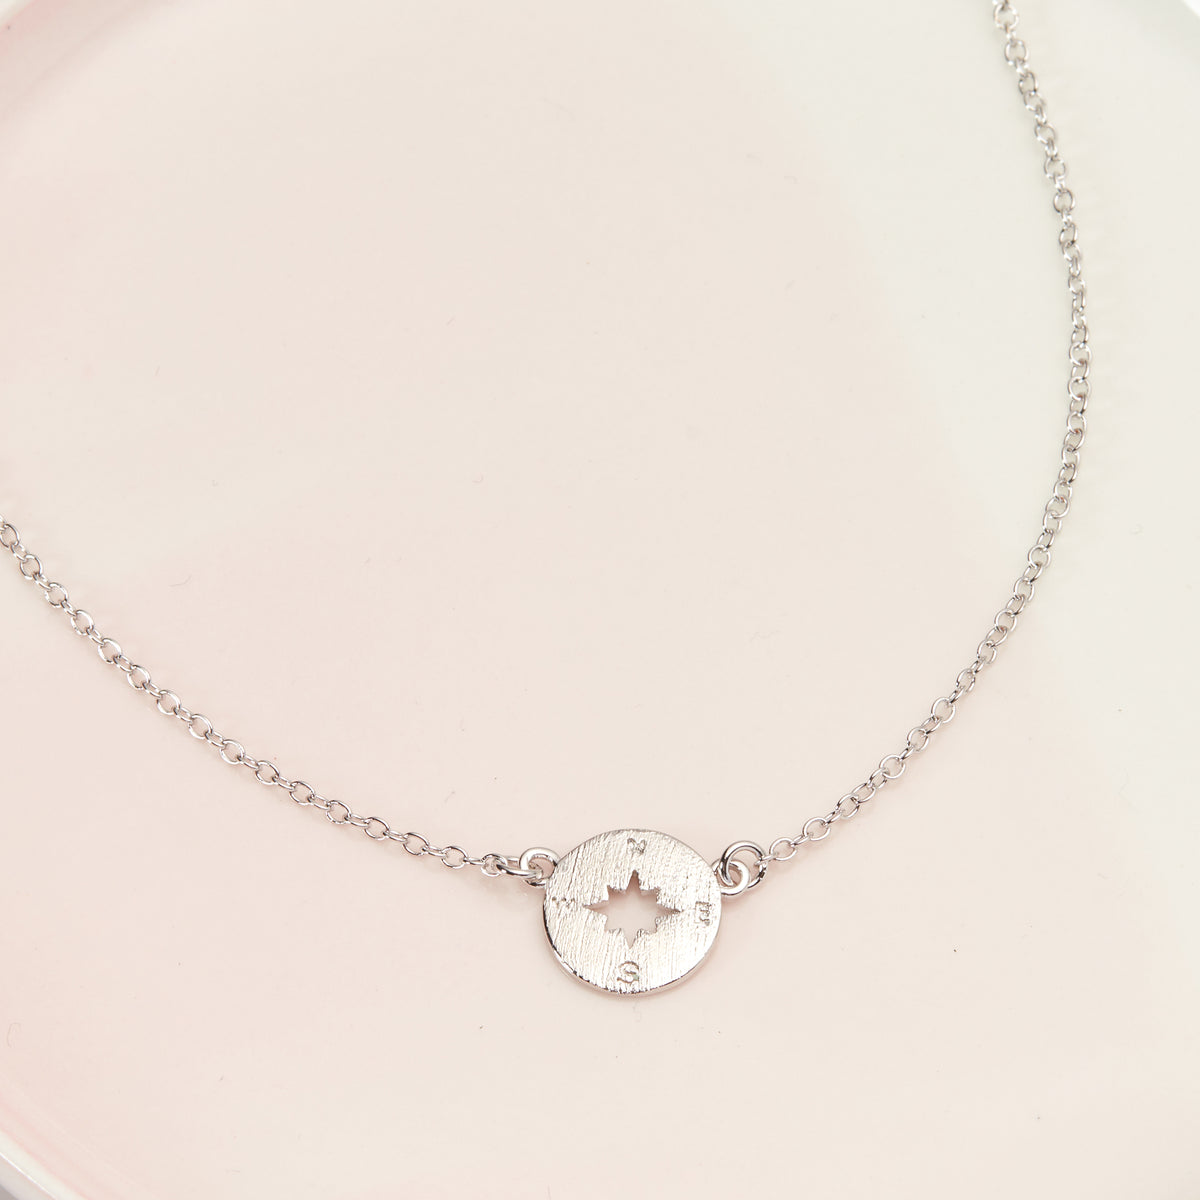 Necklace Birthday Gift for Women